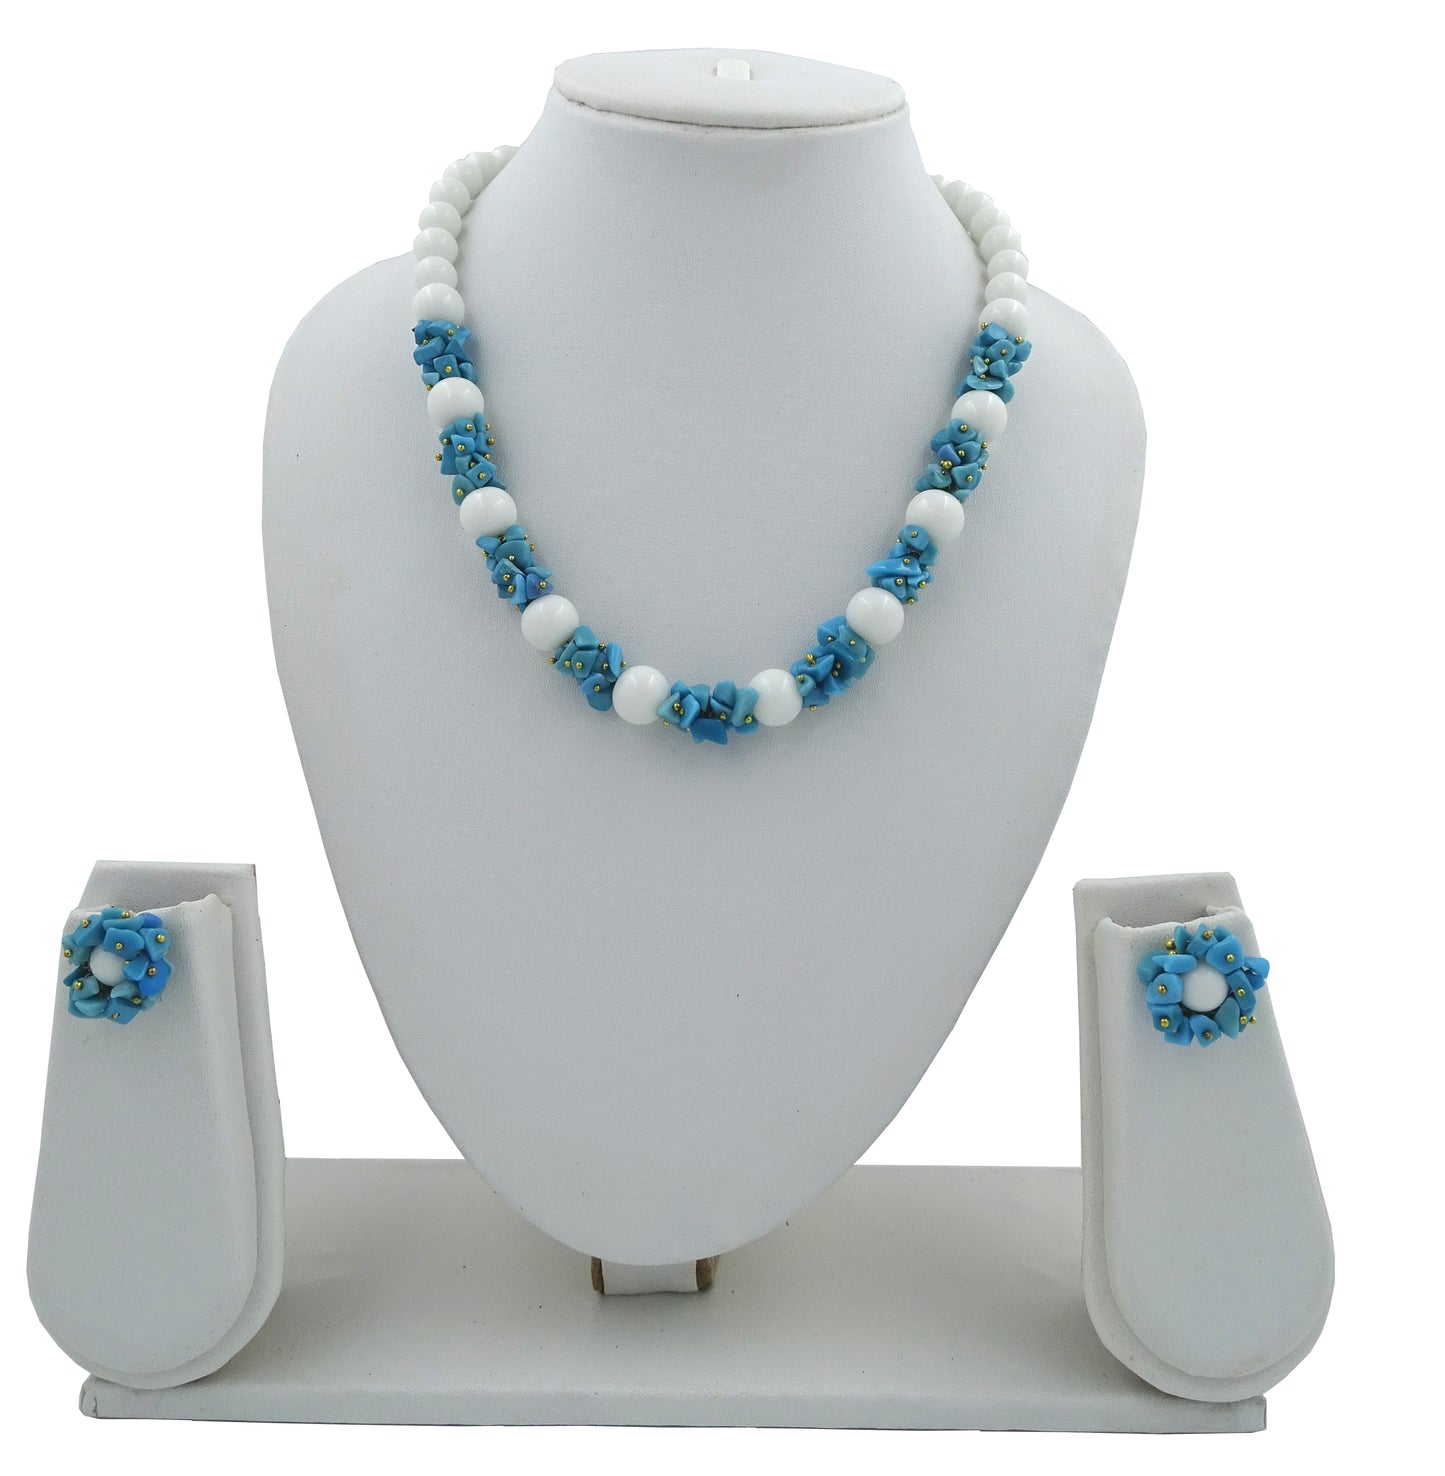 Centorganic - Semi Precious Gemstone Crystal Beads Necklace with Earring ,Turquoise Firoza Stone chip and white Jade 16" Mala for Girl and Women Fashion Jewellery, with beautiful jewellery box for gifting.